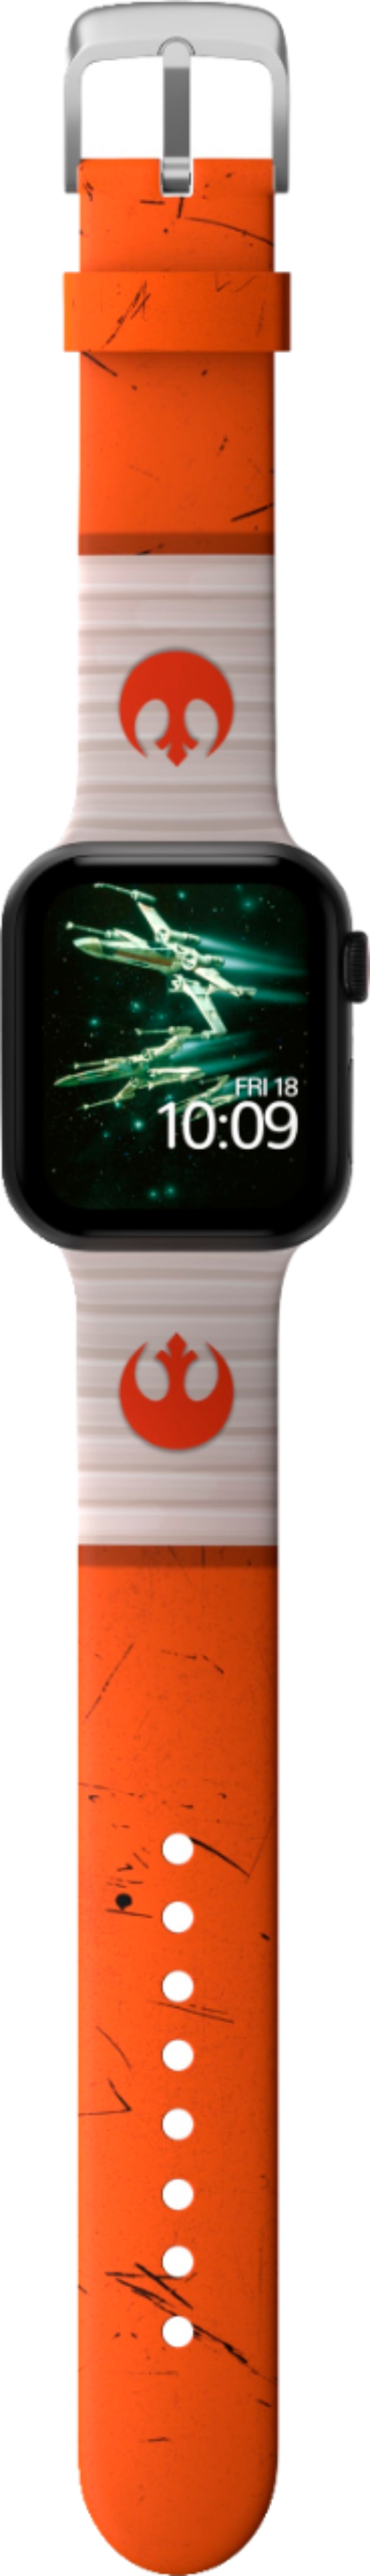 Left View: MobyFox - Star Wars - Rebel Classic Smartwatch Band – Compatible with Apple Watch - Fits 38mm, 40mm, 42mm and 44mm